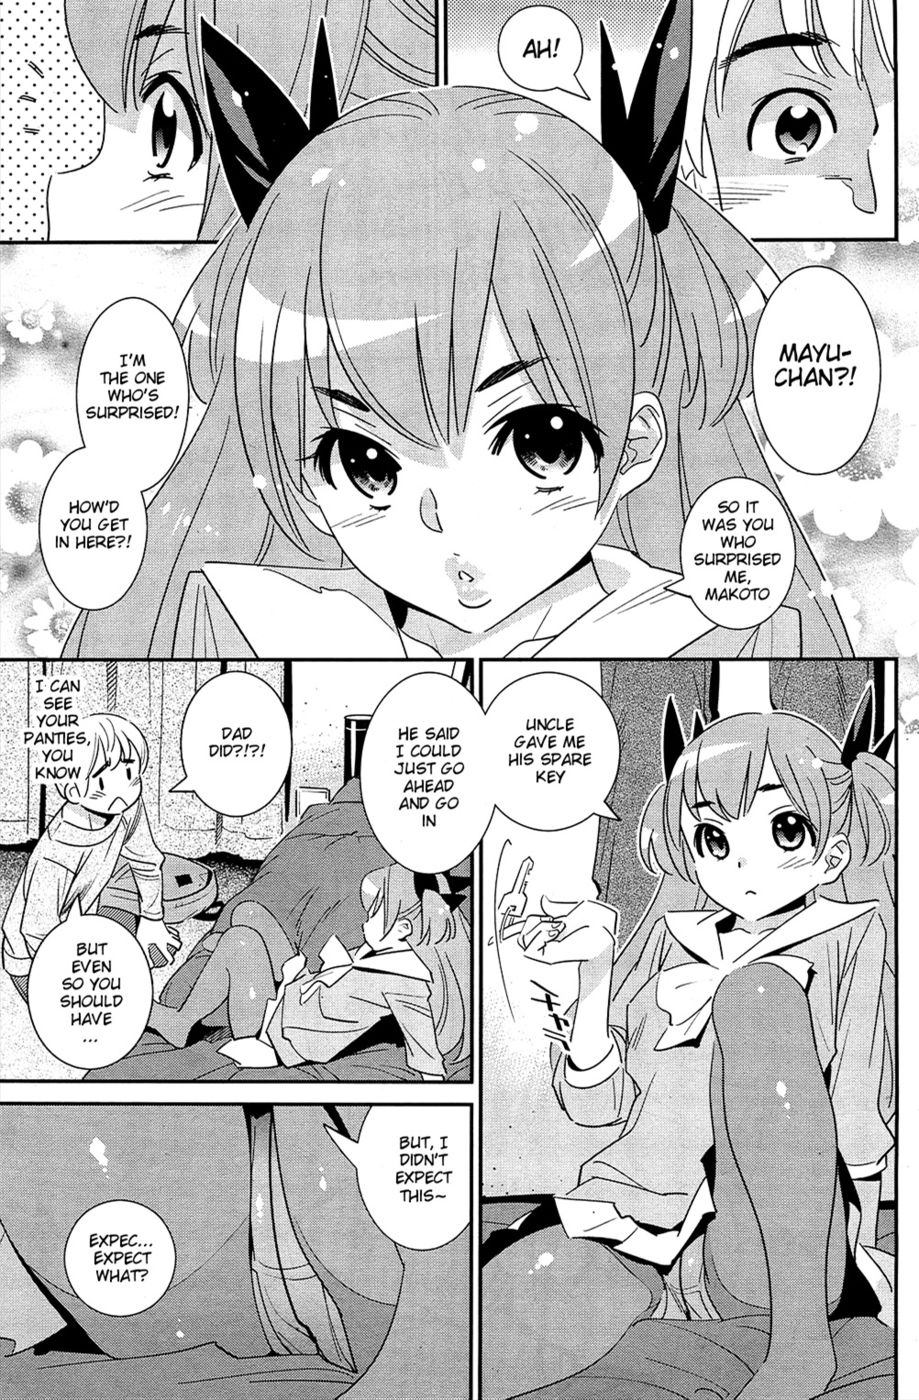 Hentai Manga Comic-The Ghost Behind My Back? Attack! Little Monster!-Read-3